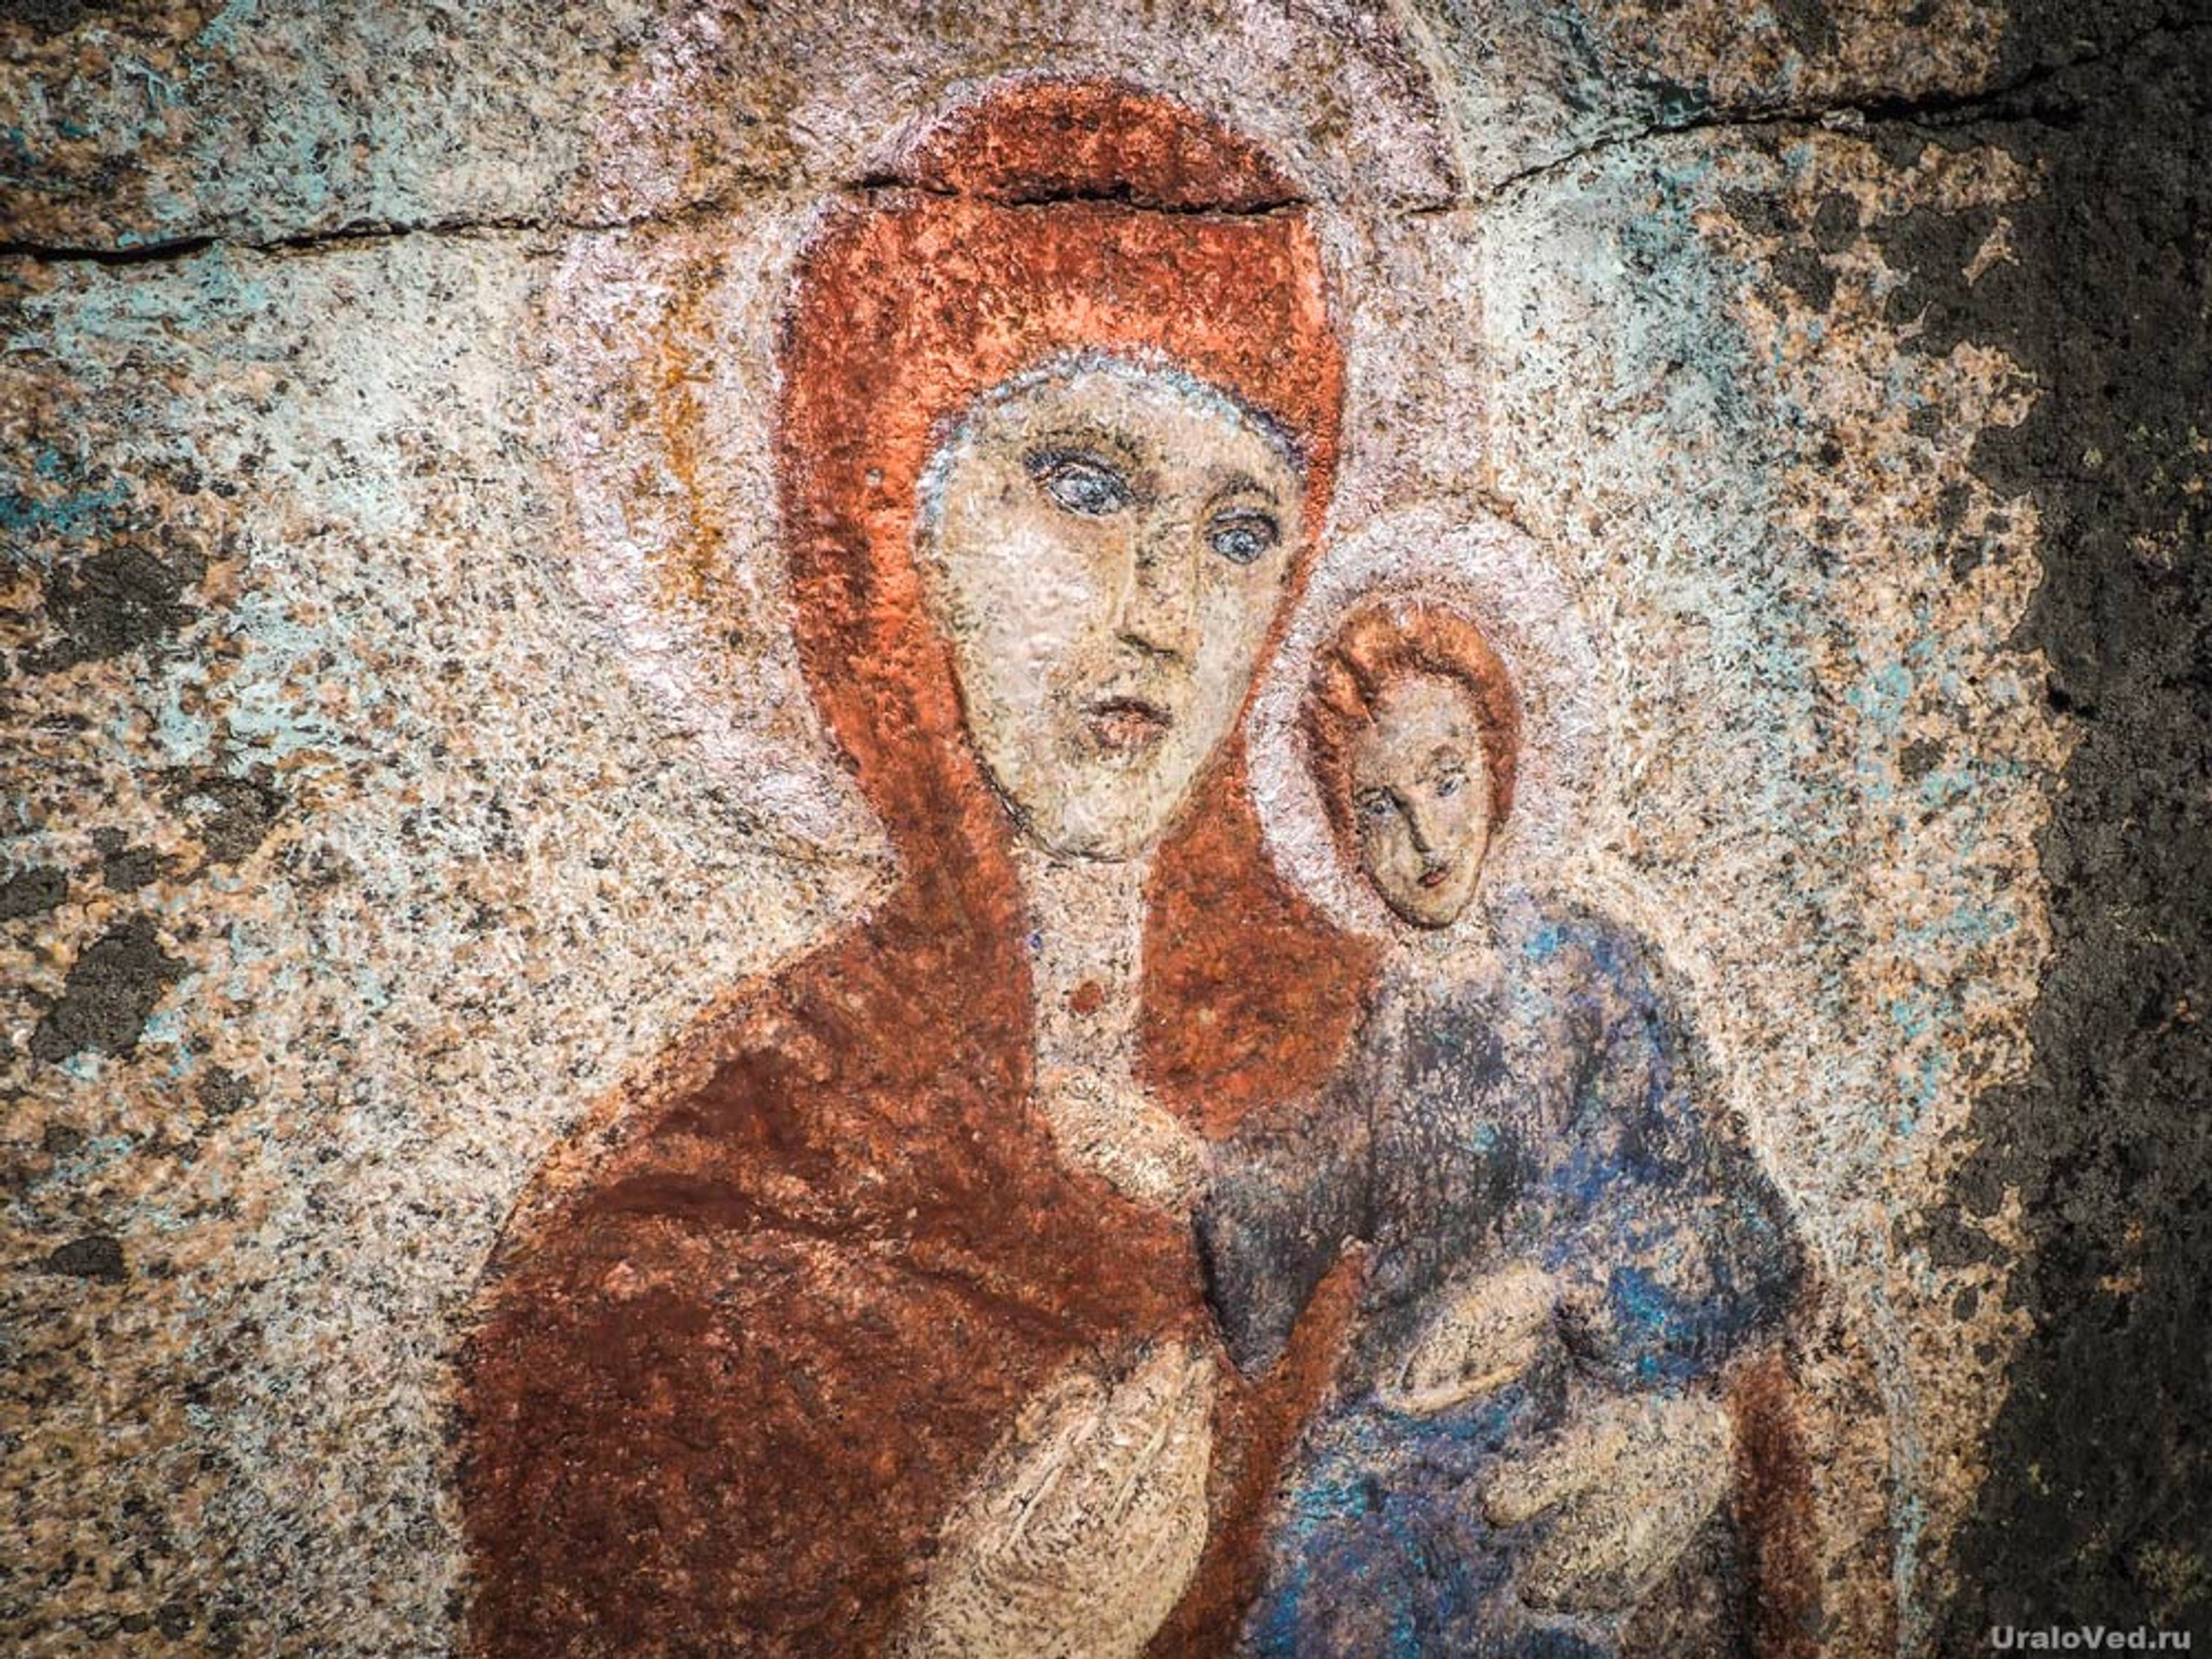 The icon of the Mother of God carved into the rock.